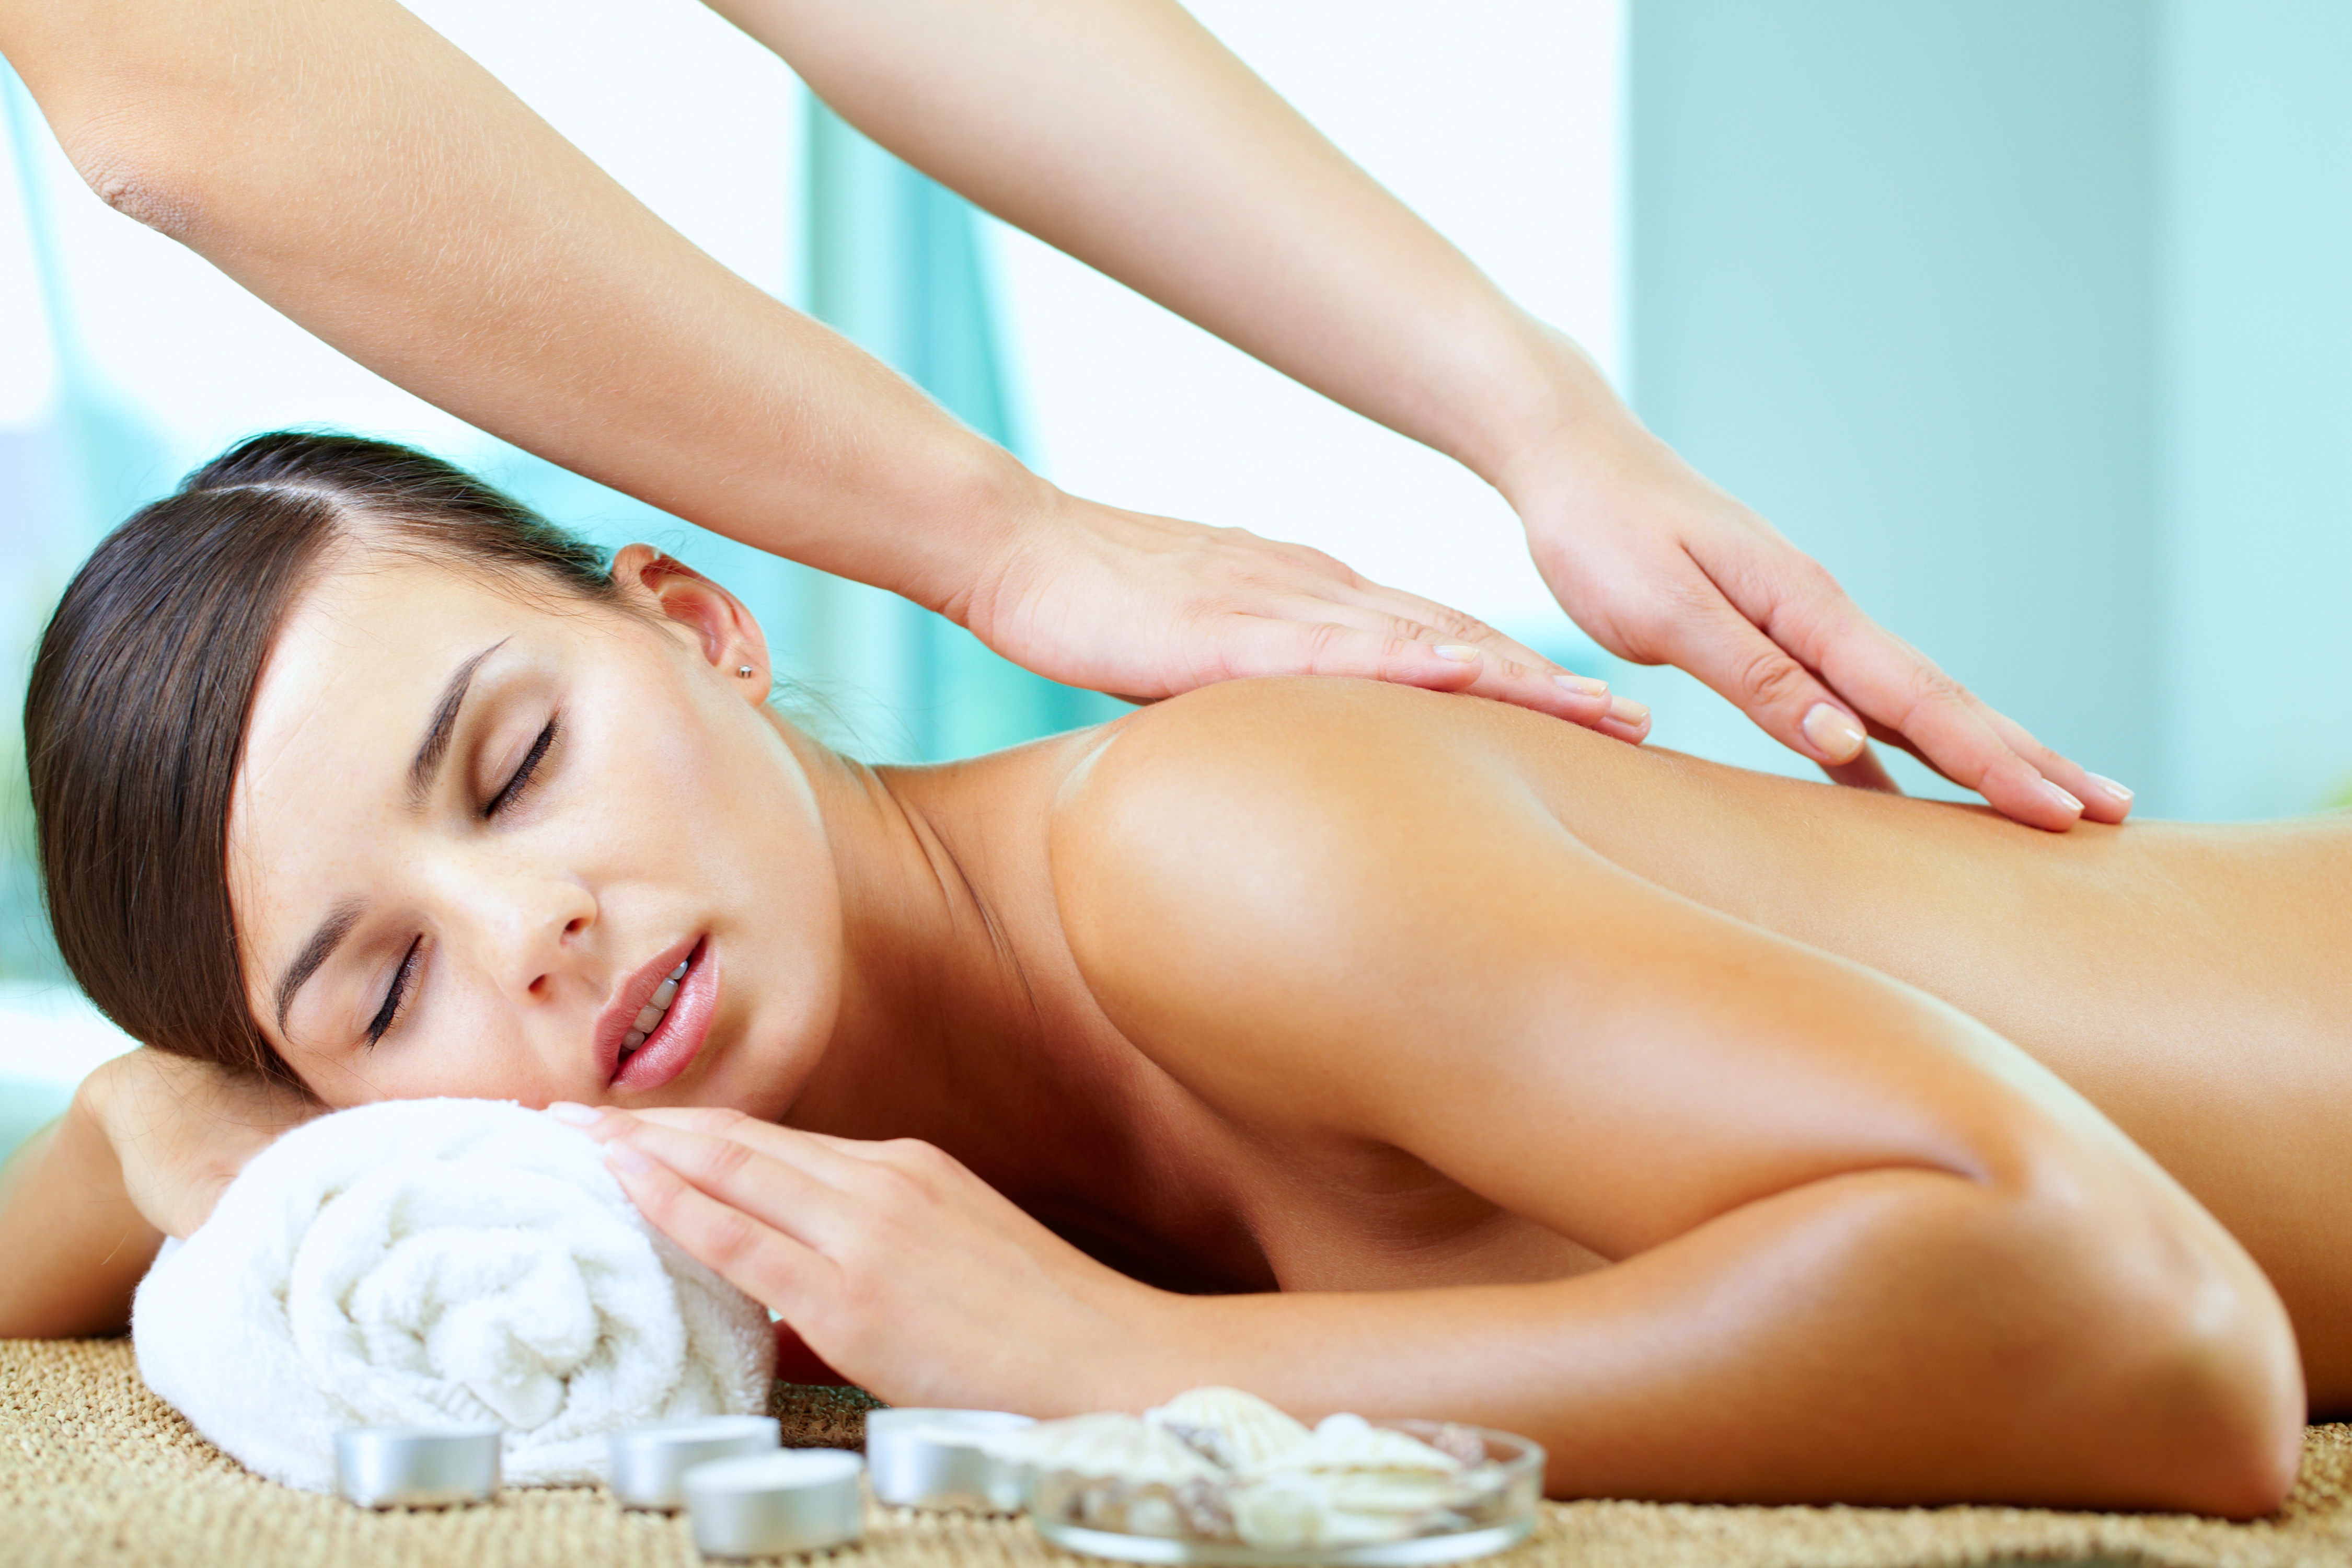 Massage Away the Winter Blues: Get Rid of Fatigue and Irritability